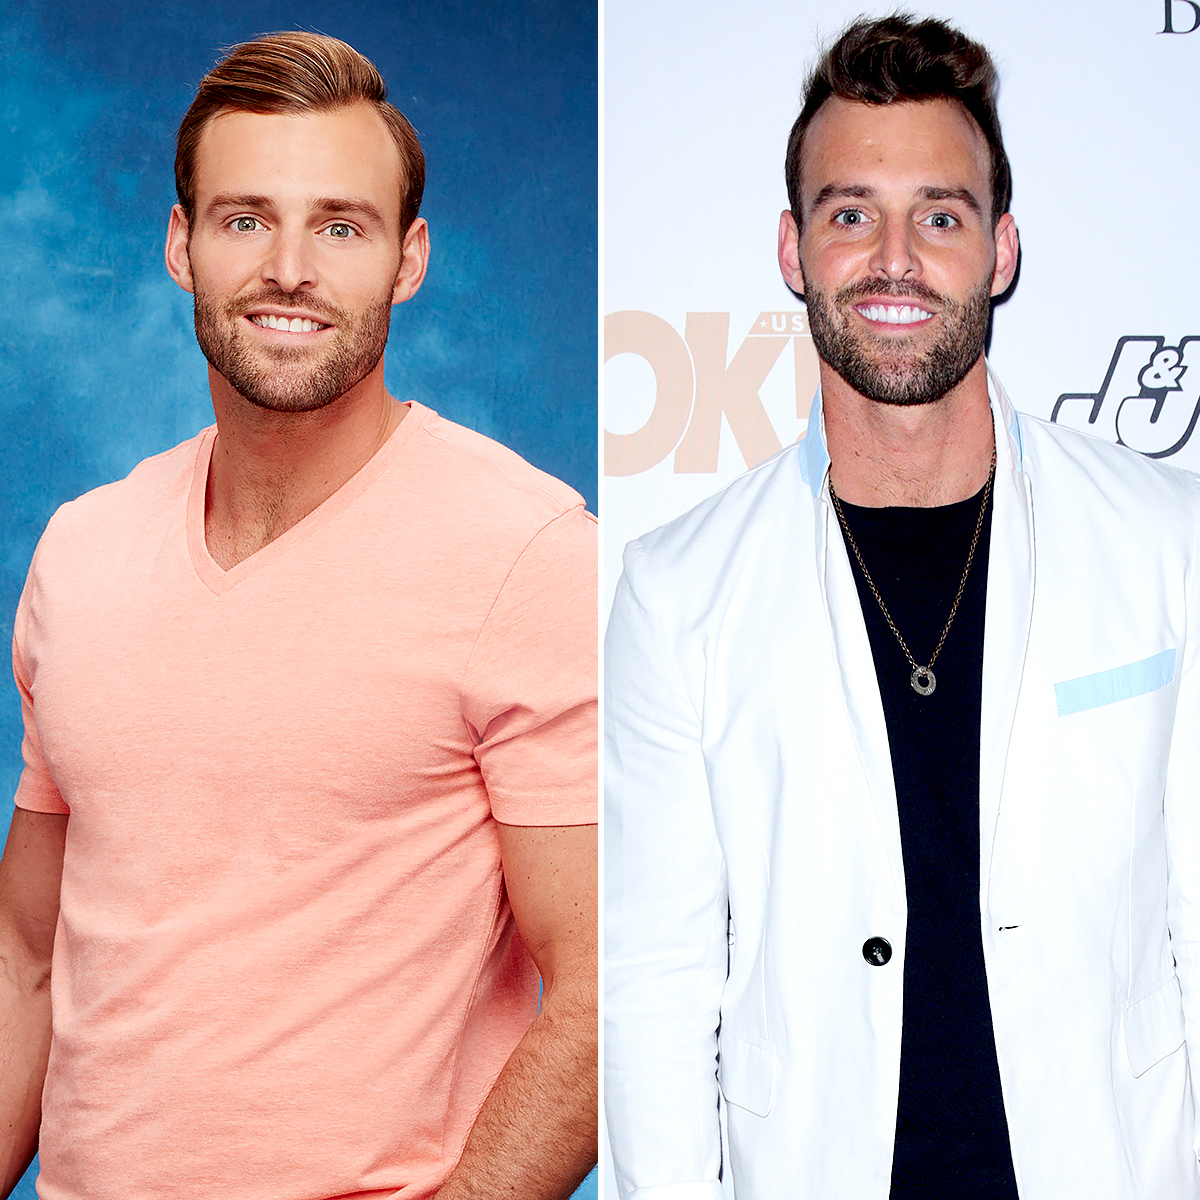 Robby Hayes The Bachelorette where are they now